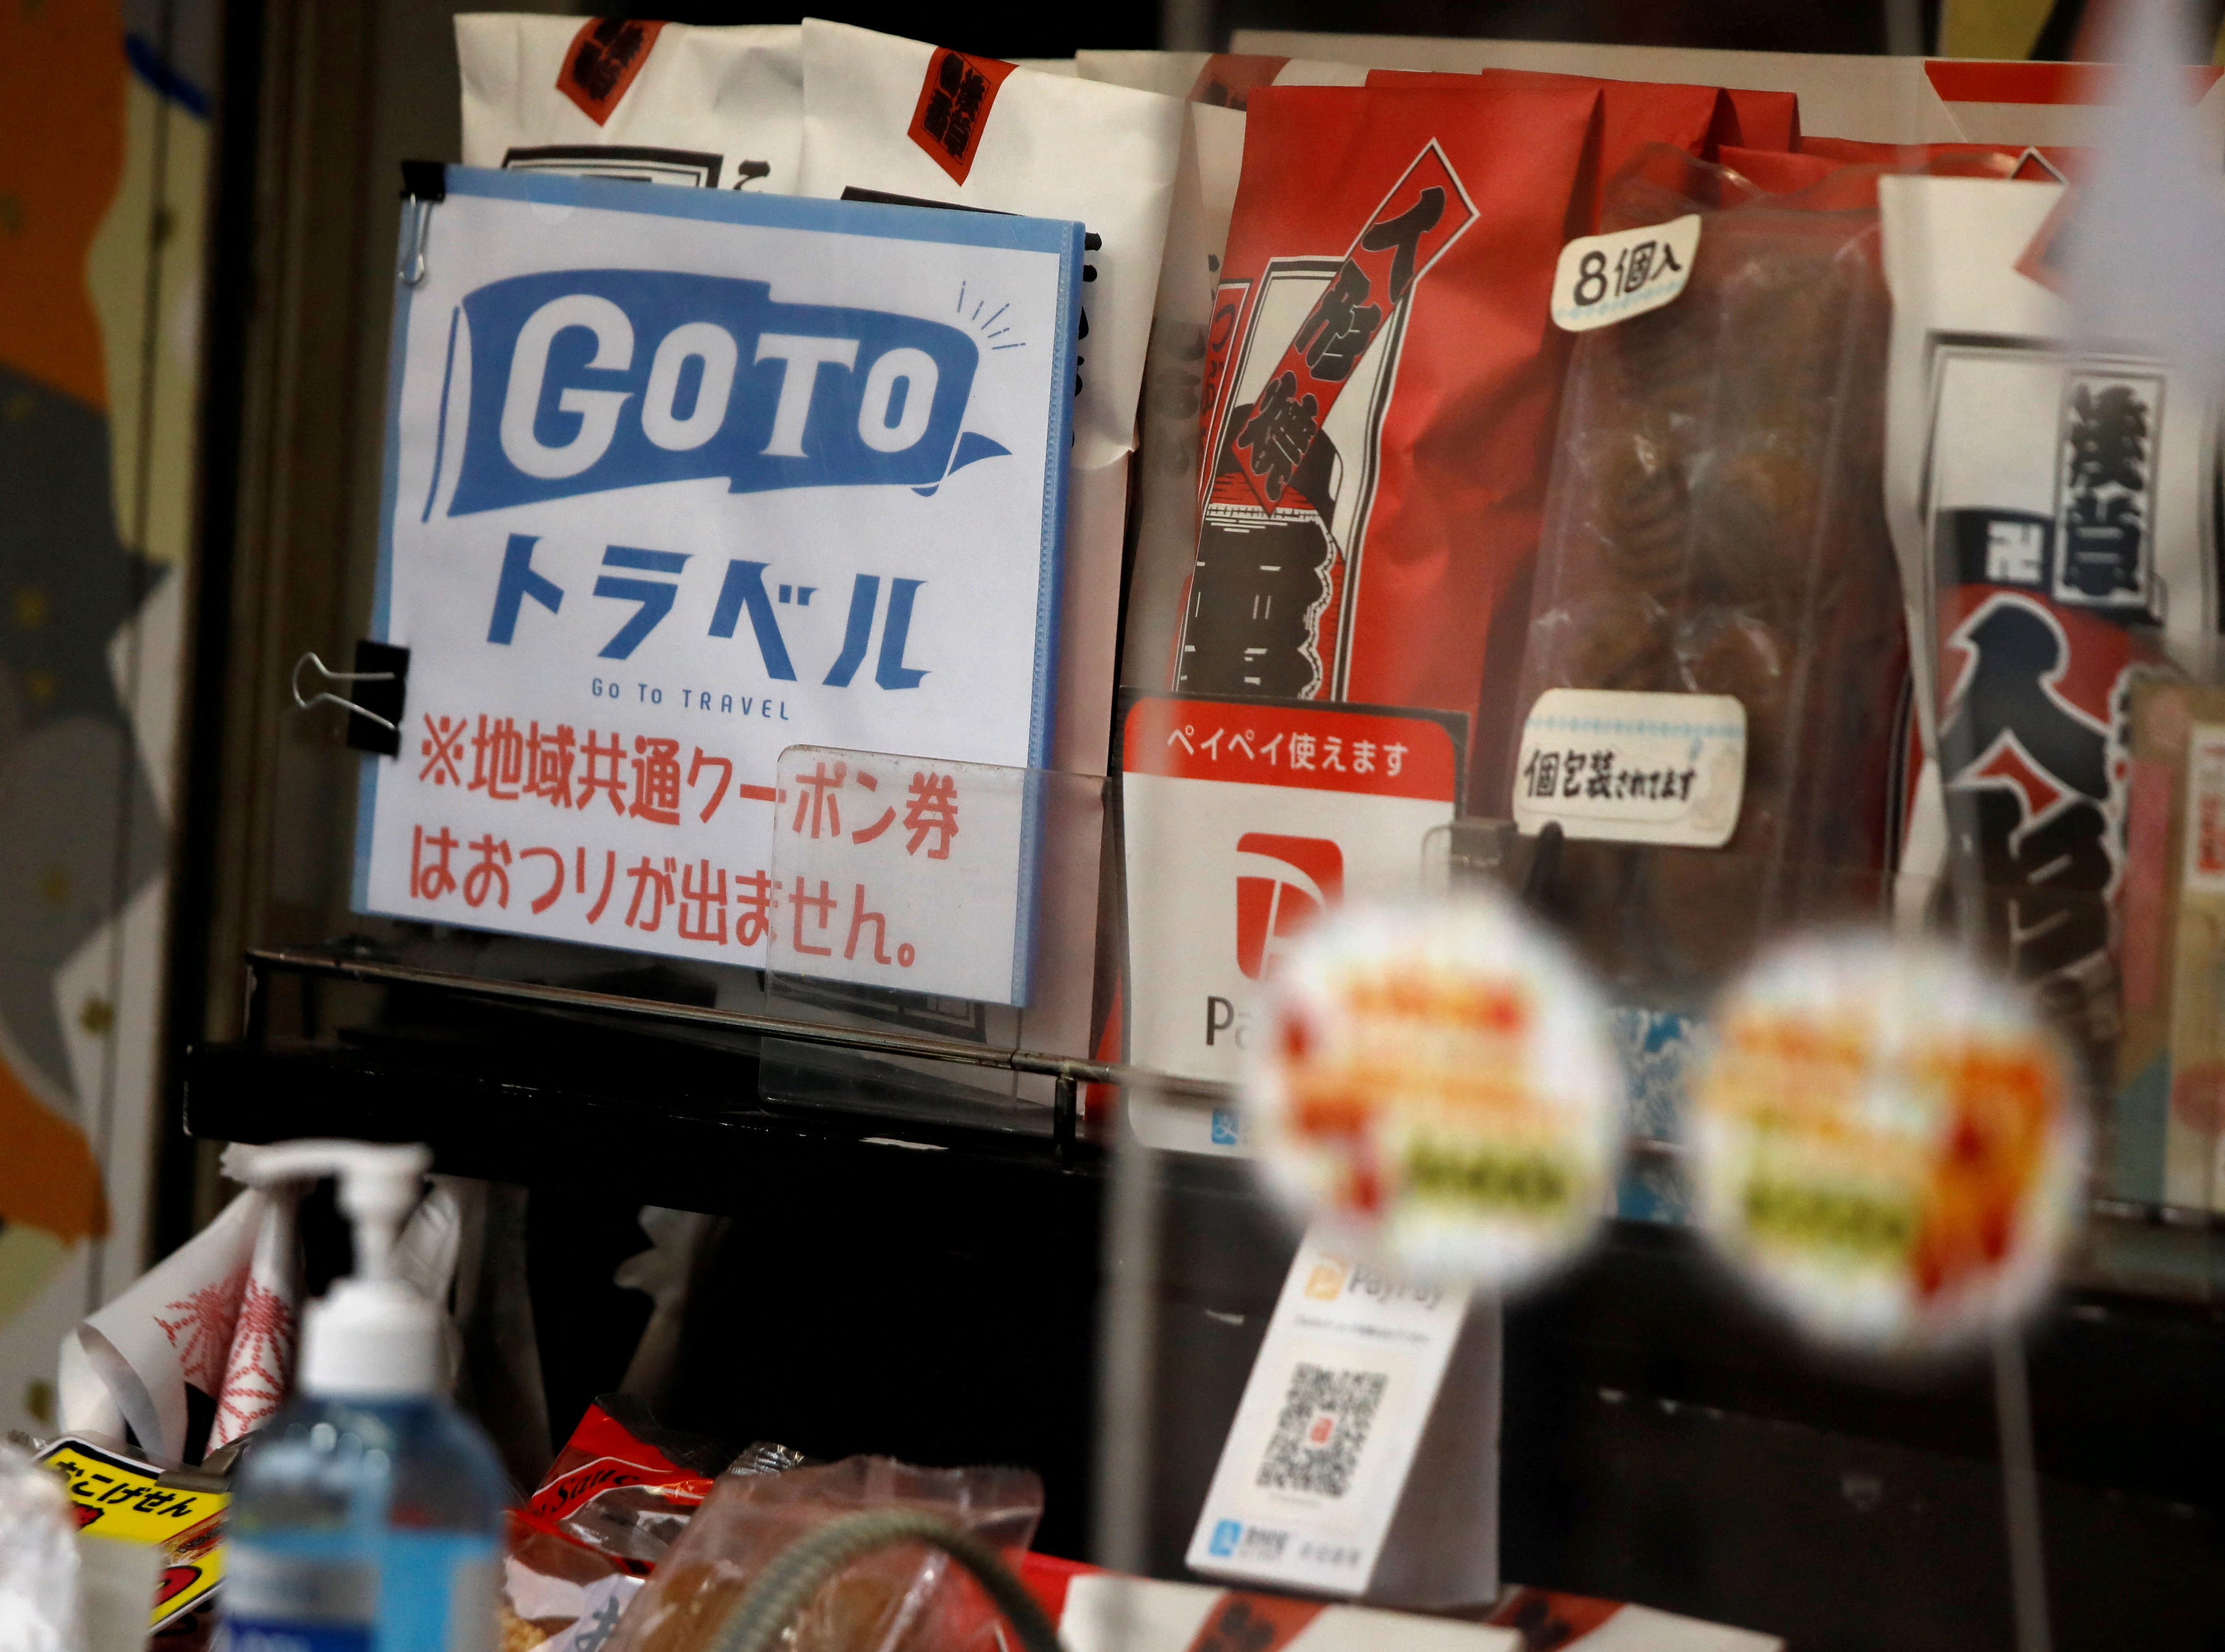 A sign for 'Go To Travel' campaign is displayed at a shop at Asakusa district, a popular sightseeing spot, amid the coronavirus disease (COVID-19) outbreak in Tokyo